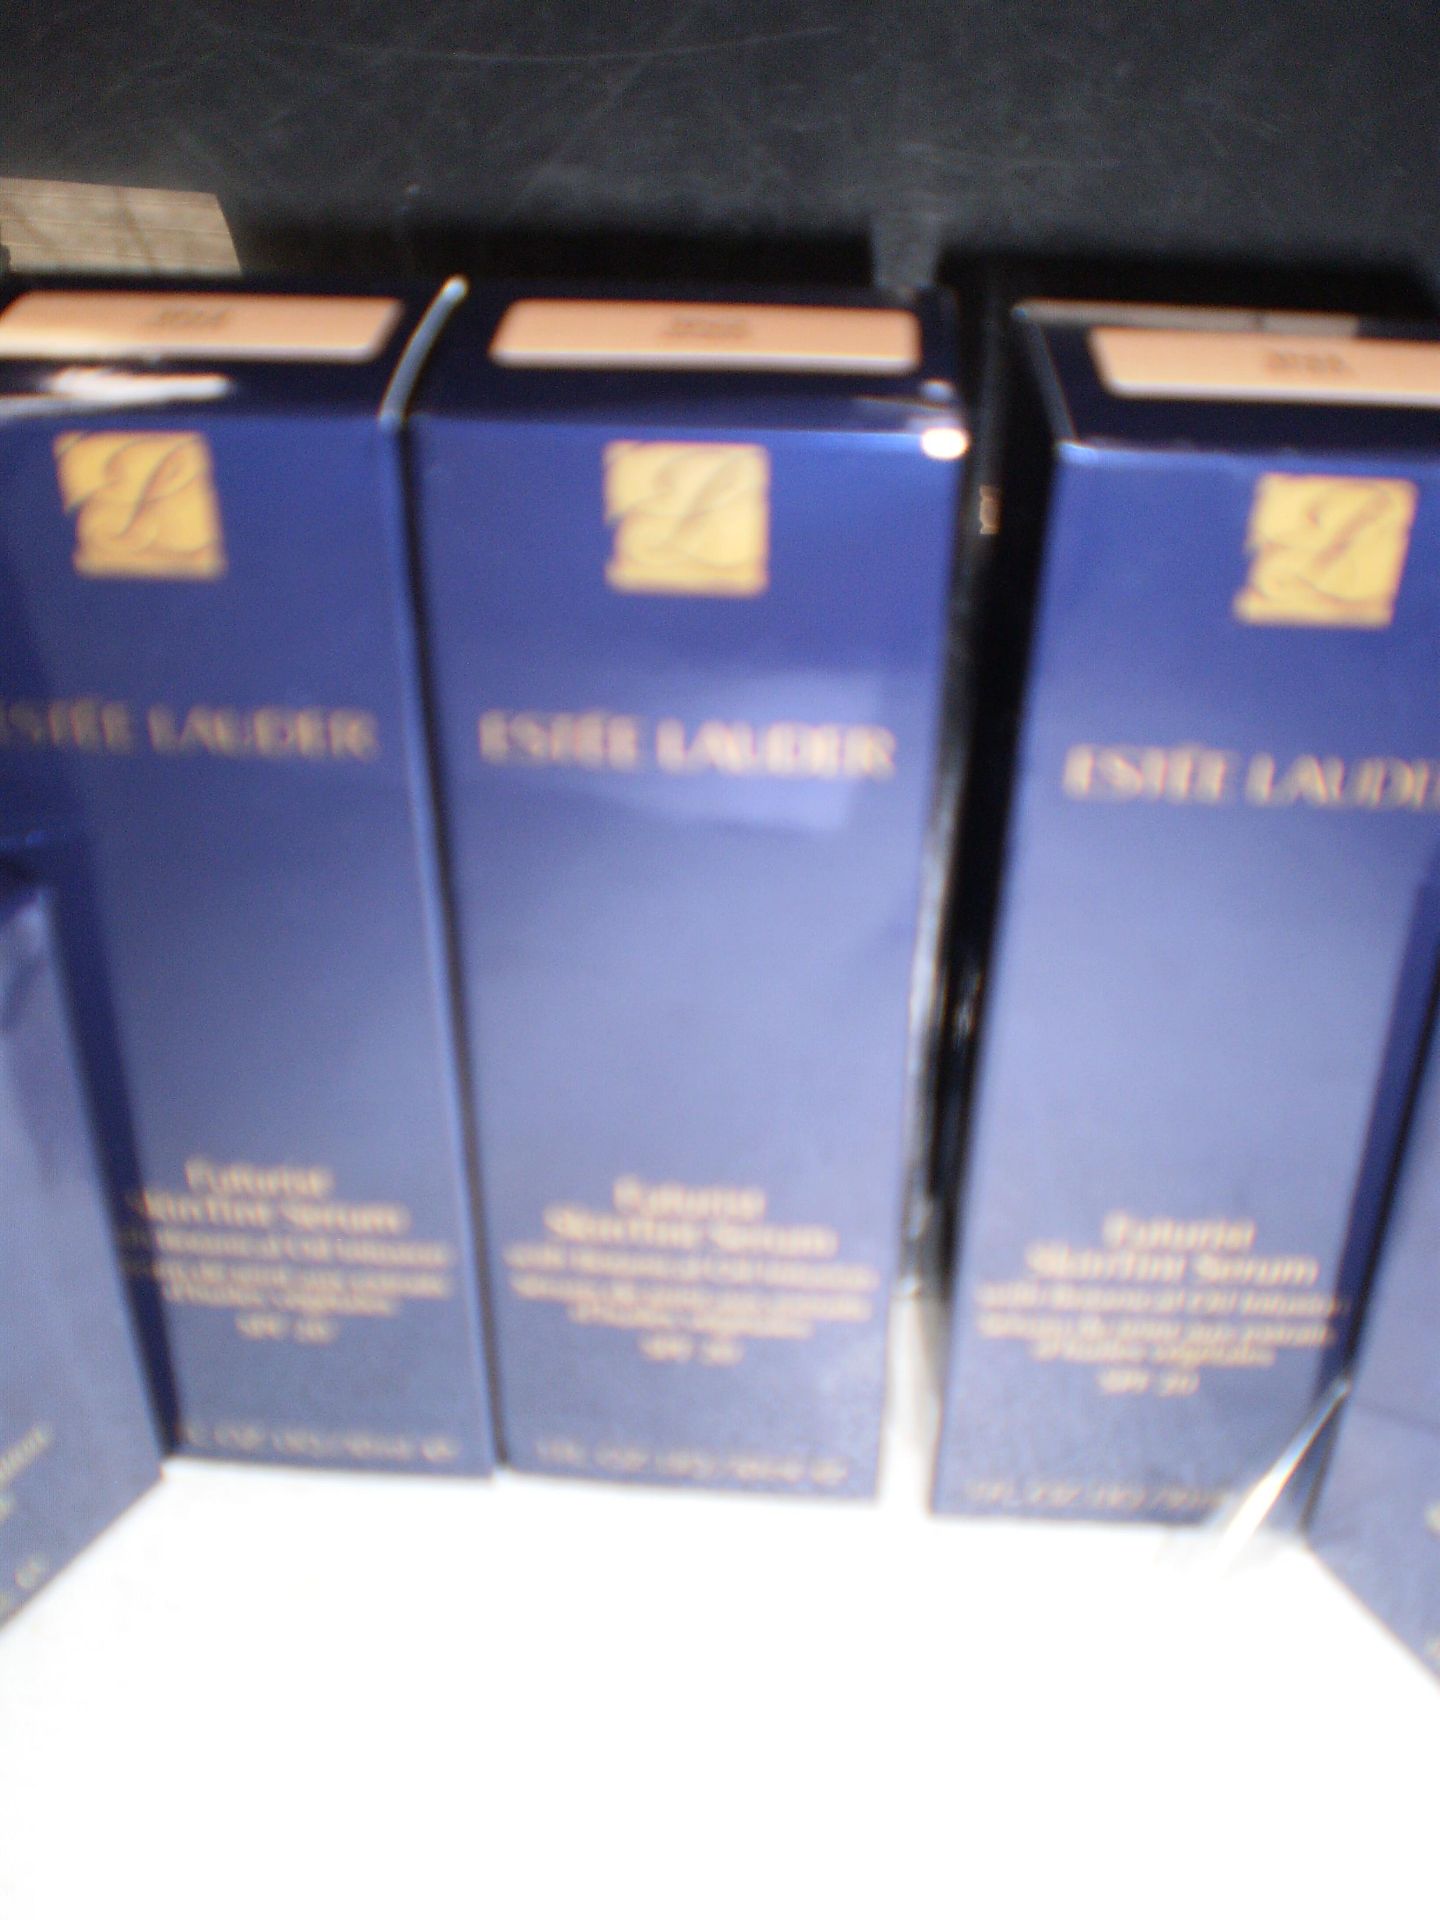 5 x items of Estee Lauder, comprising 3 x 30ml skin tint serum, shade 3N2 wheat and 2 x 12g double